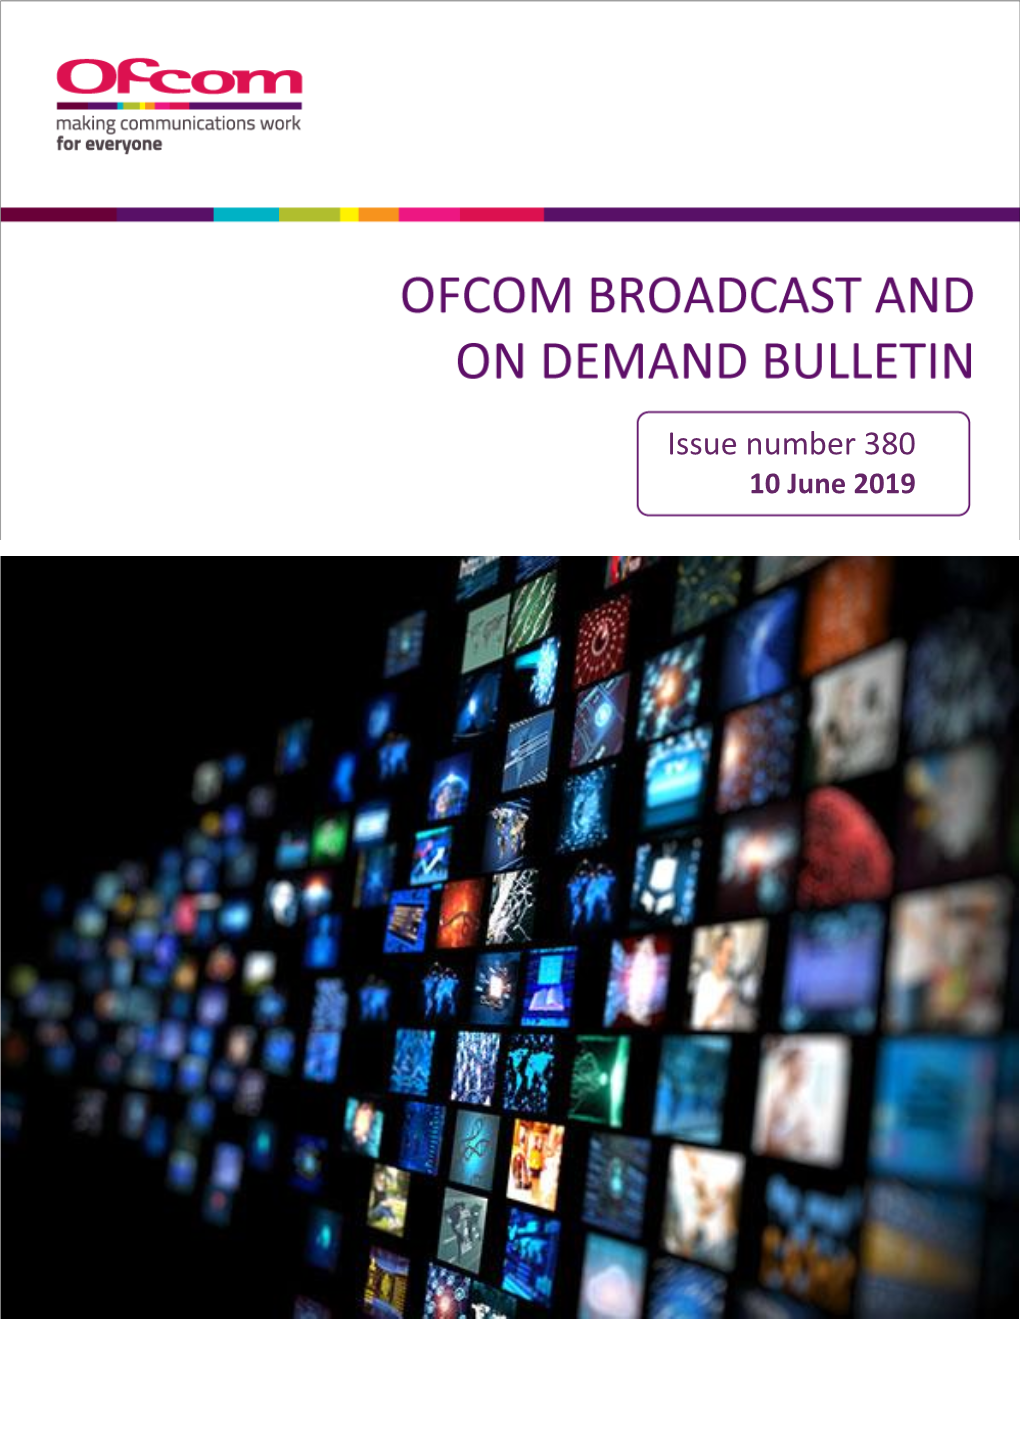 Ofcom Broadcast and on Demand Bulletin, Issue